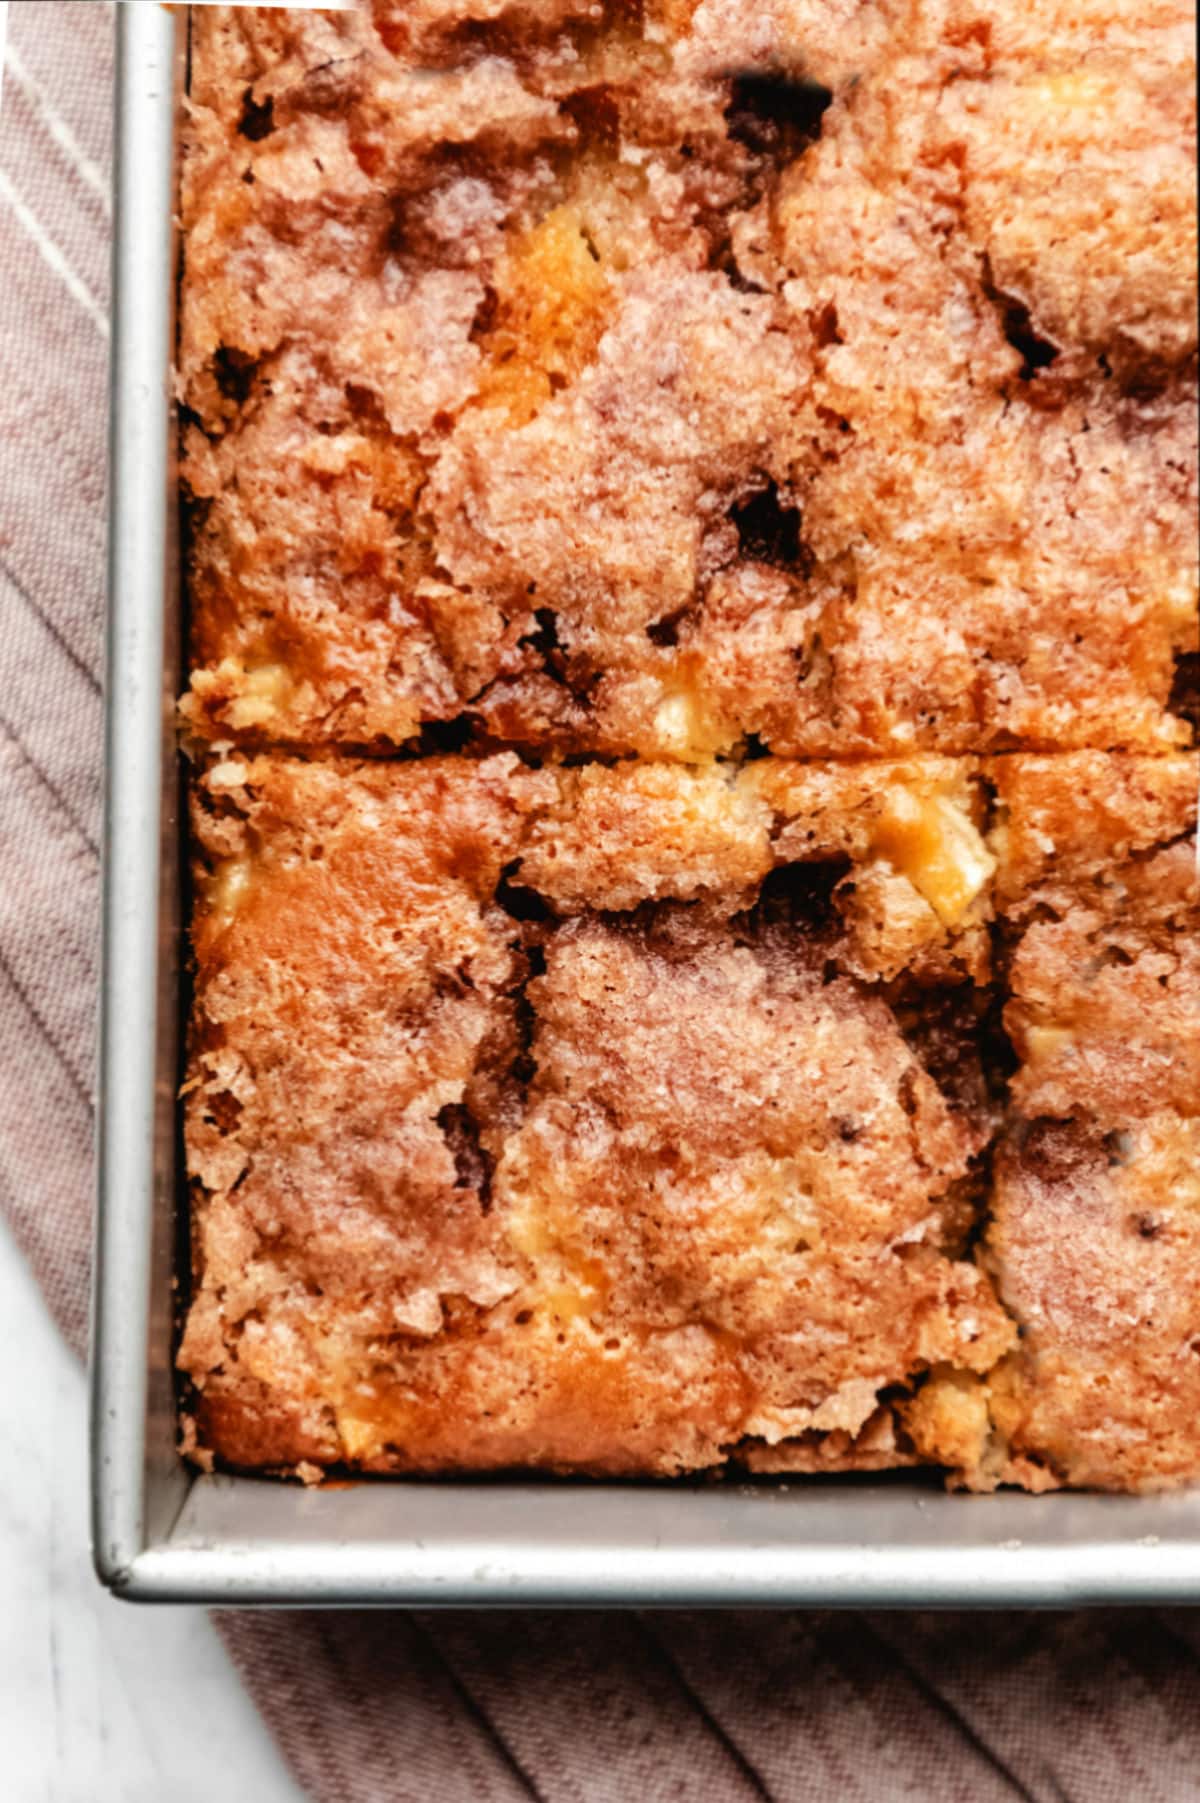 Close up photo of a cut piece of cinnamon apple cake in a metal baking pan.